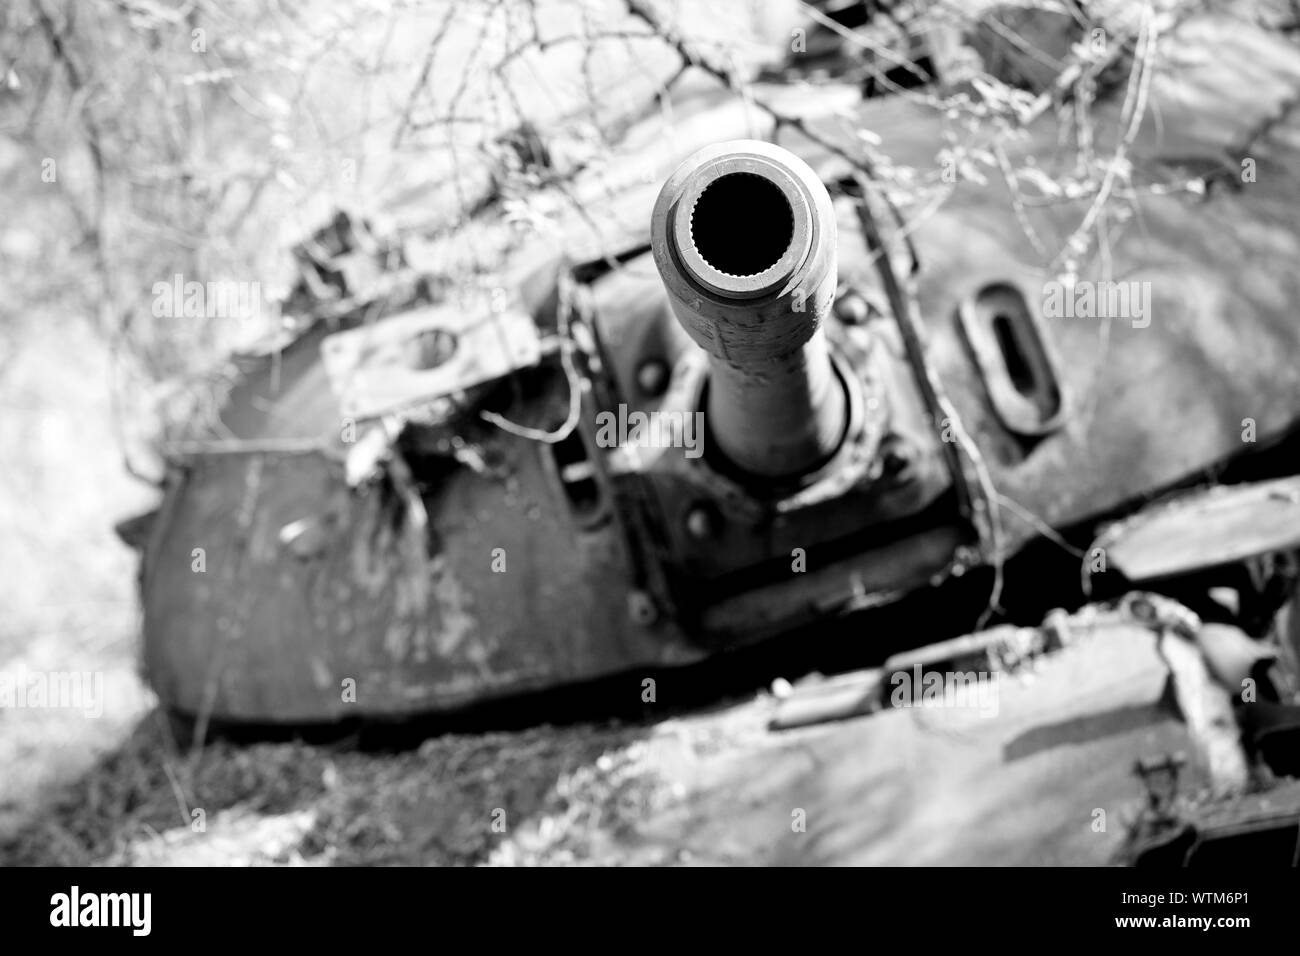 Wrecked northern Sudanese tank in South Sudan, focus on barrel Stock Photo